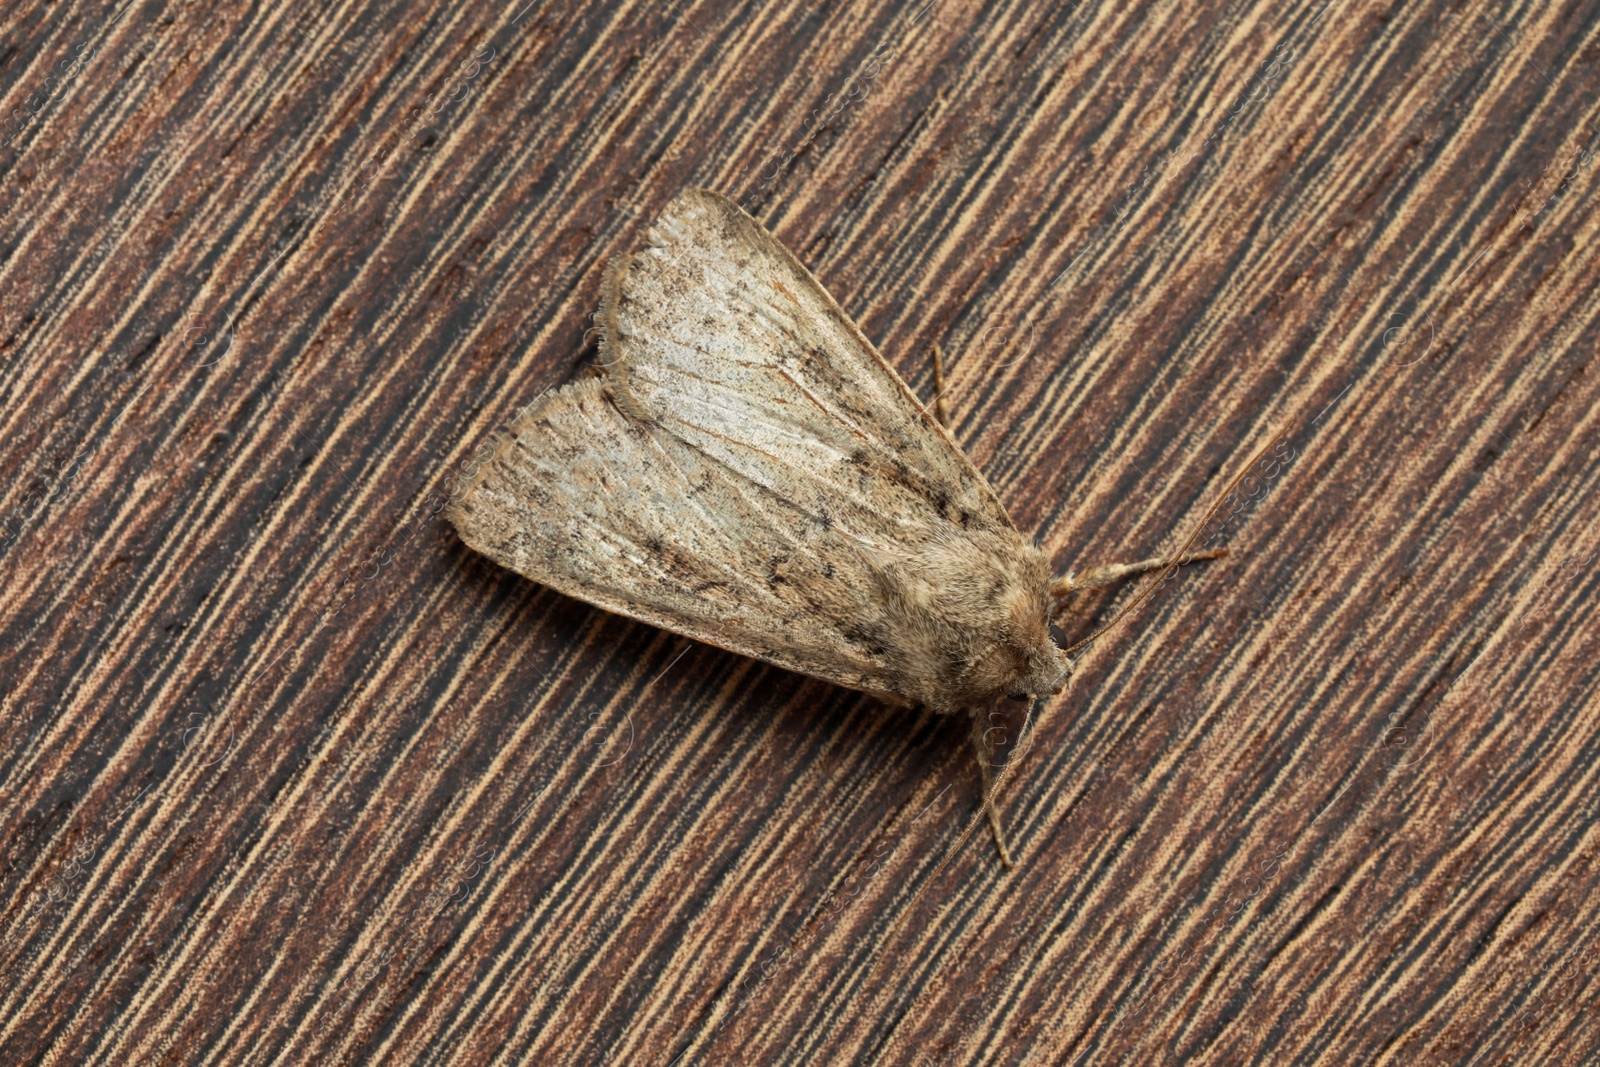 Photo of Paradrina clavipalpis moth on wooden background, top view